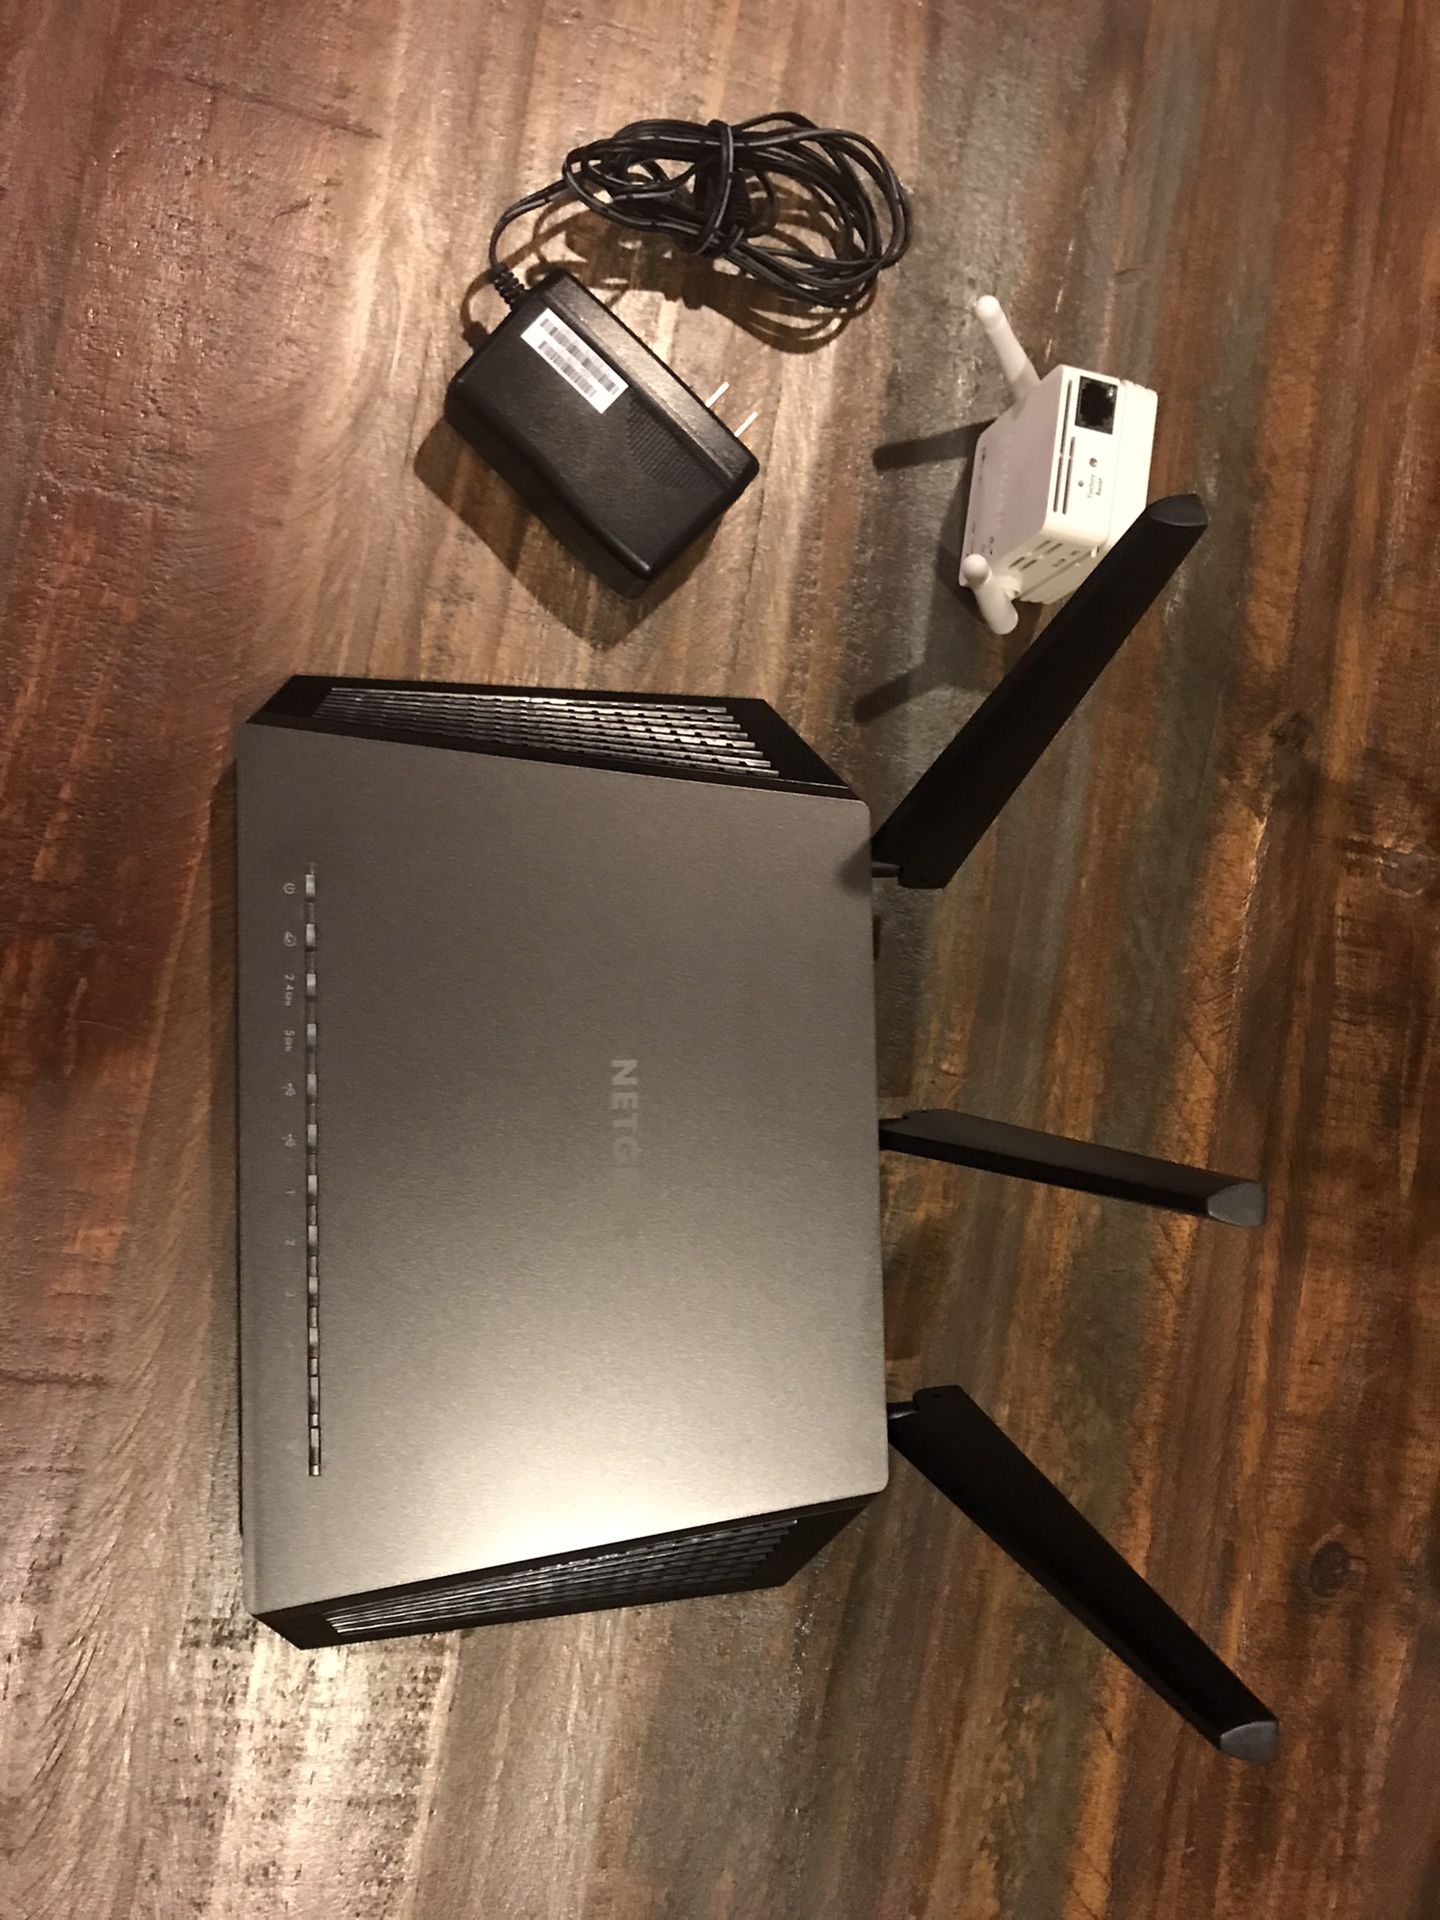 Netgear router and booster